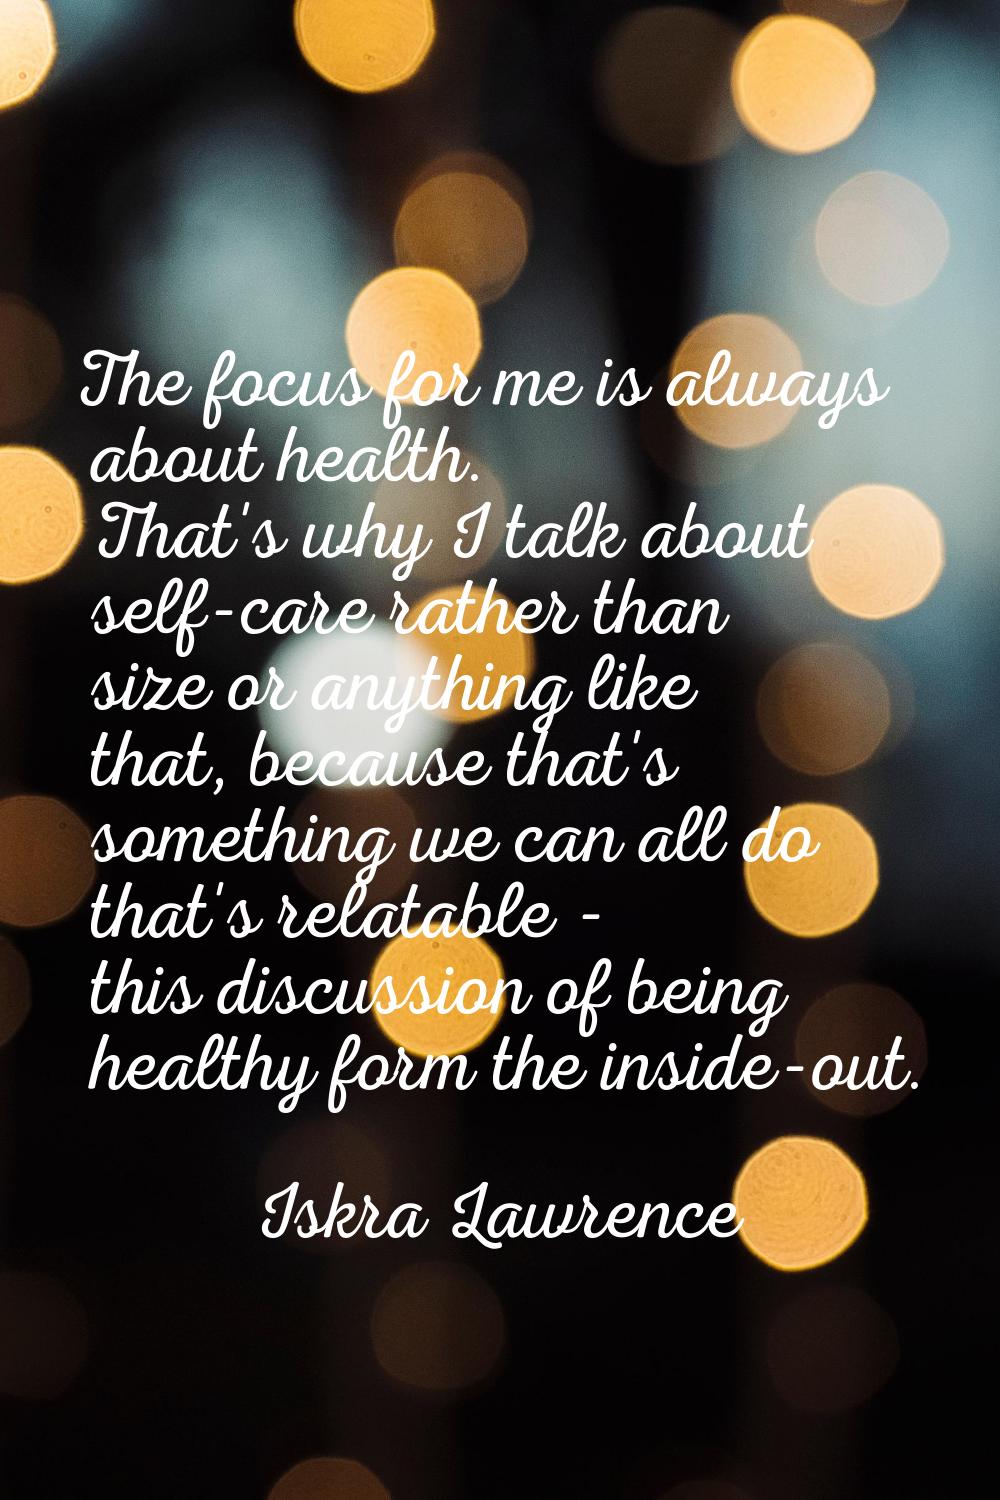 The focus for me is always about health. That's why I talk about self-care rather than size or anyt